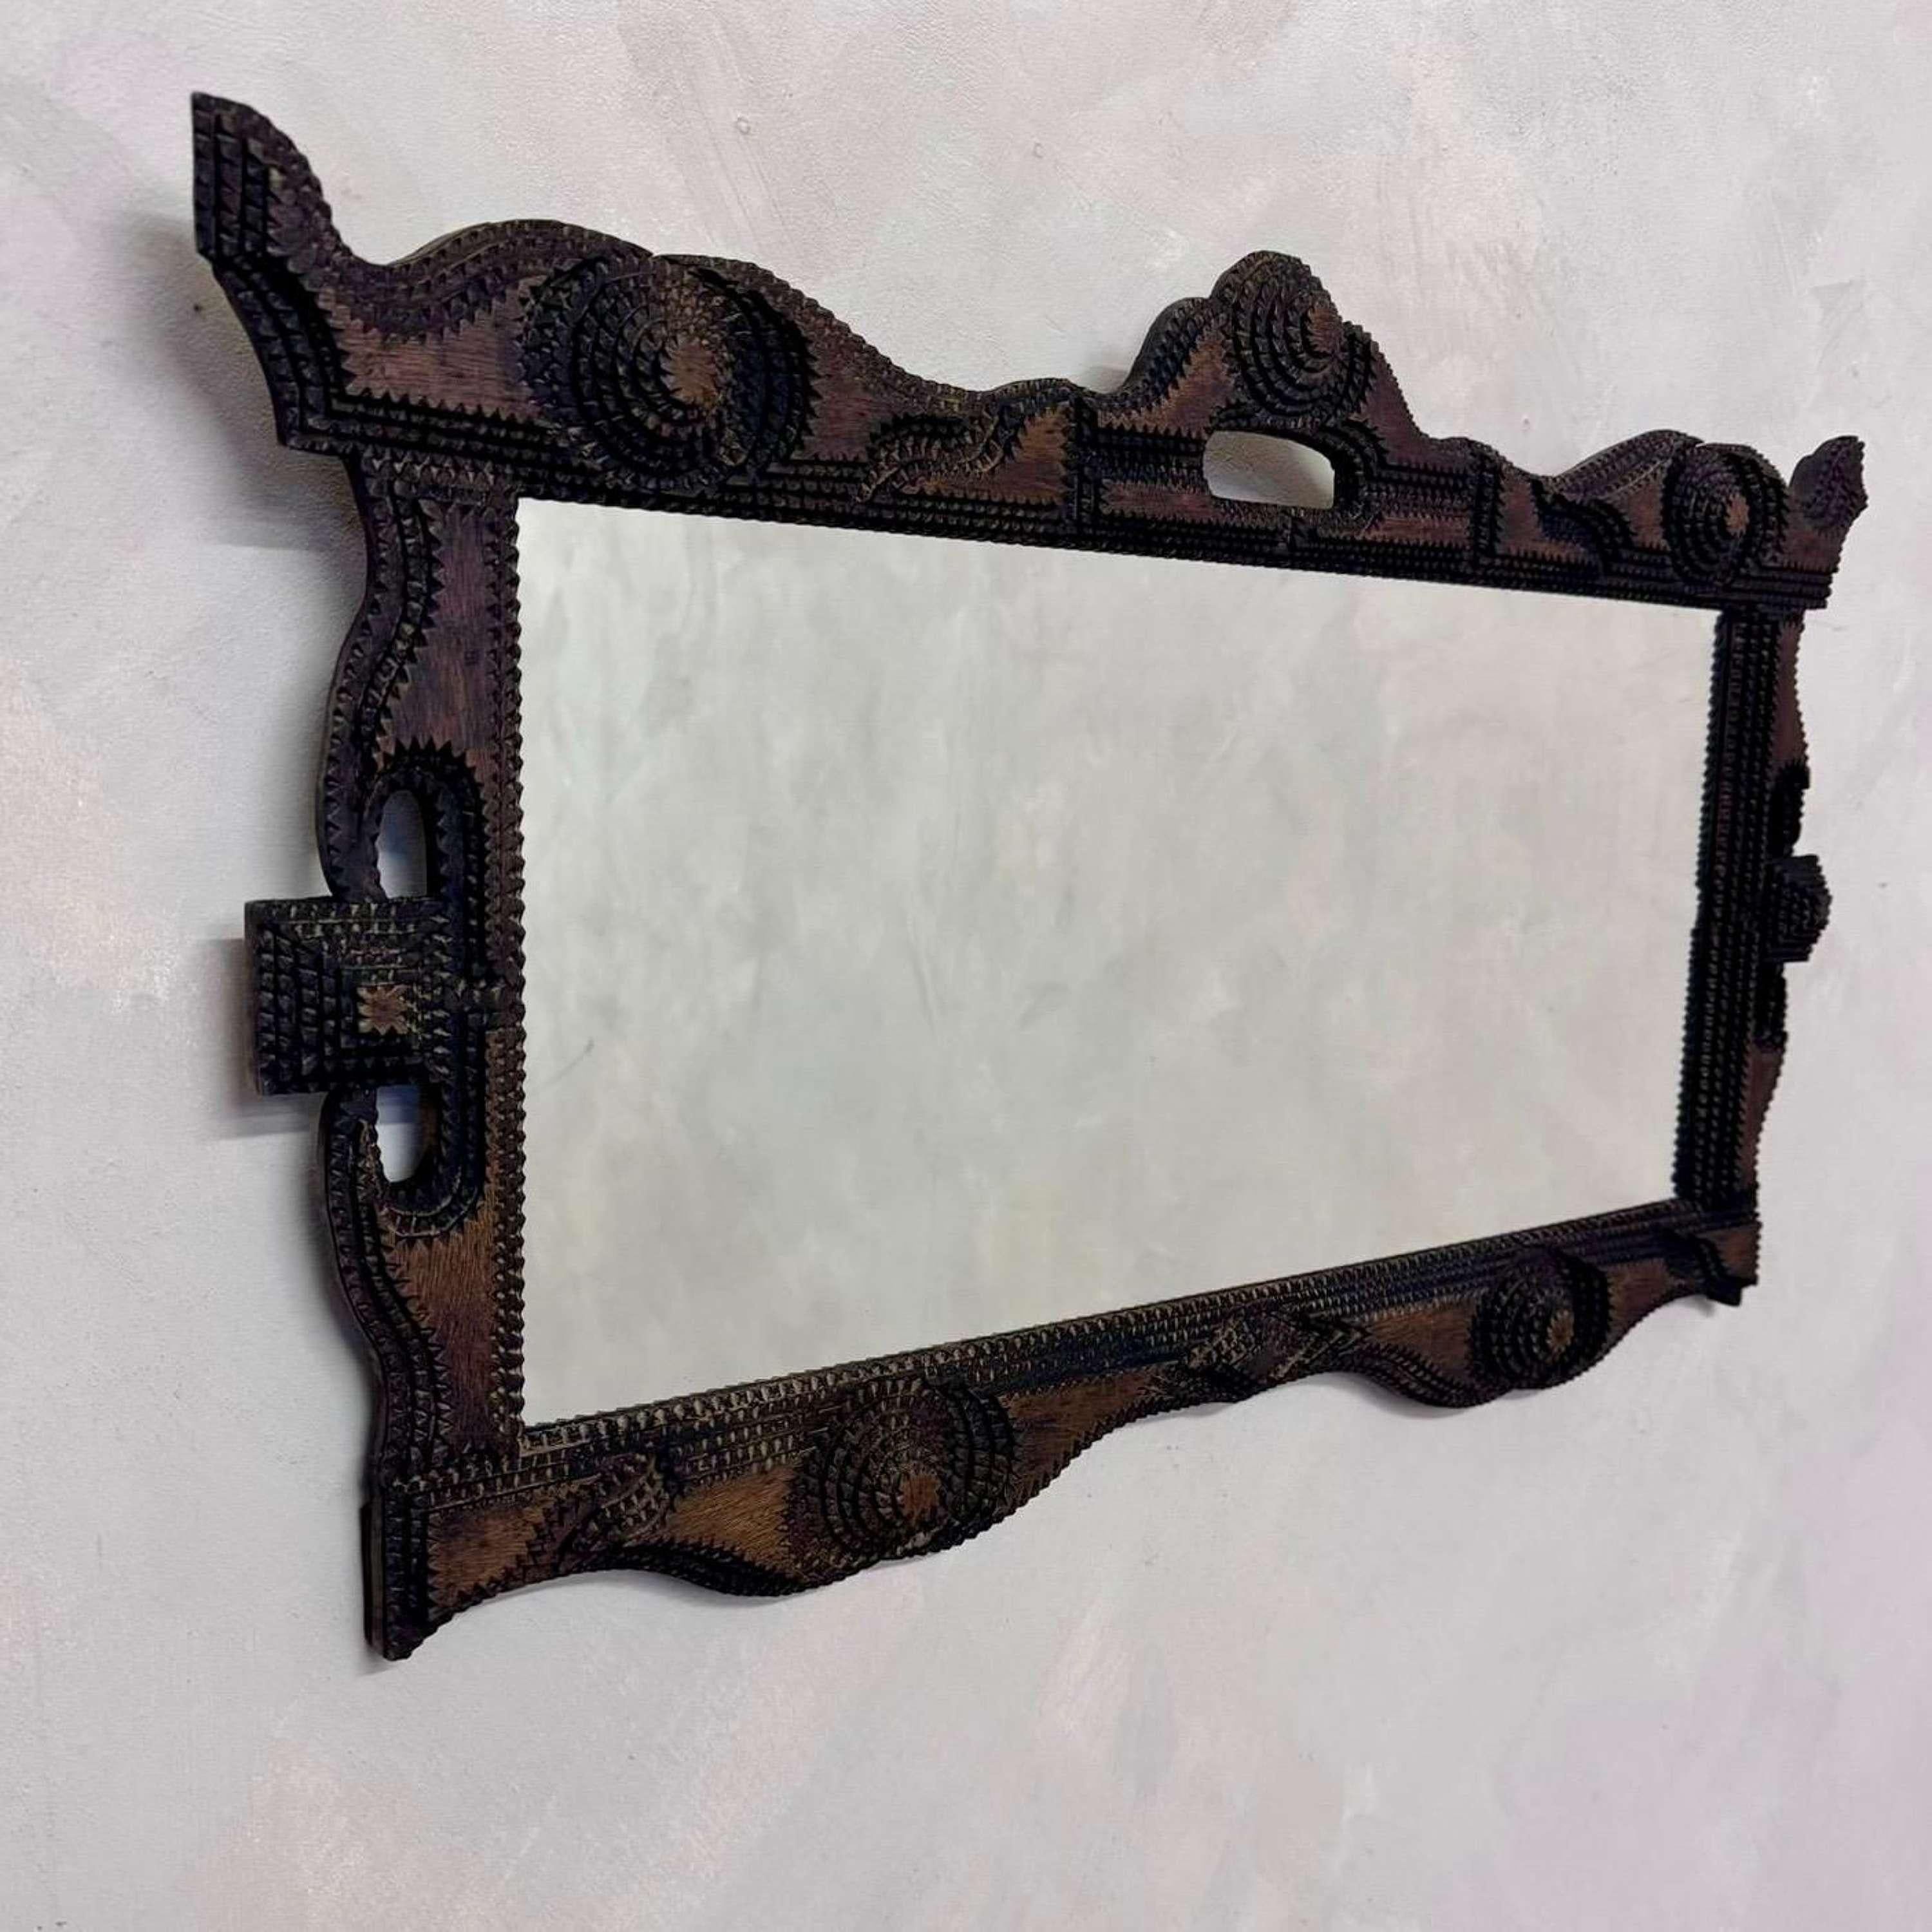 A highly decorative example of a 19th century Tramp Art Mirror.
Mirror plate recently added, with a fitted back panel by our professional framer.
Tramp Art is a style of woodworking which emerged in America in the latter half of the 19th century.